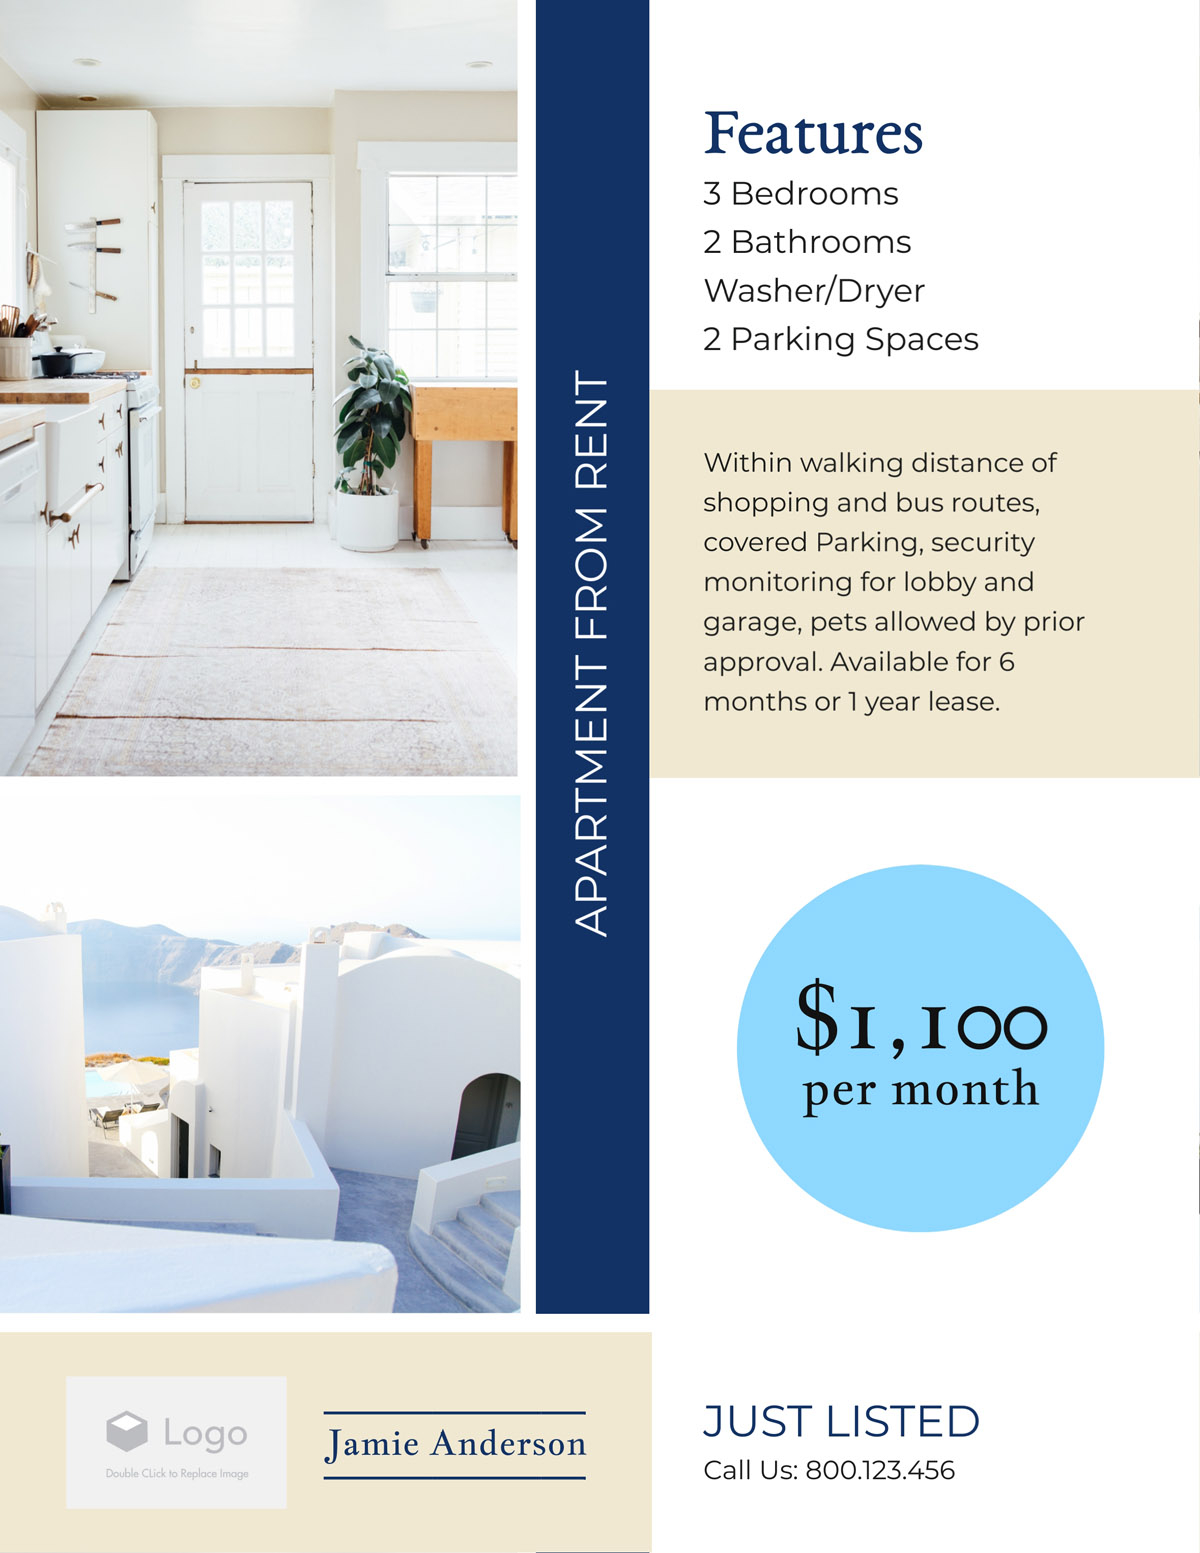 Apartment For Rent Advertisement Template - Home Design Throughout Apartment Rental Flyer Template In Apartment Rental Flyer Template